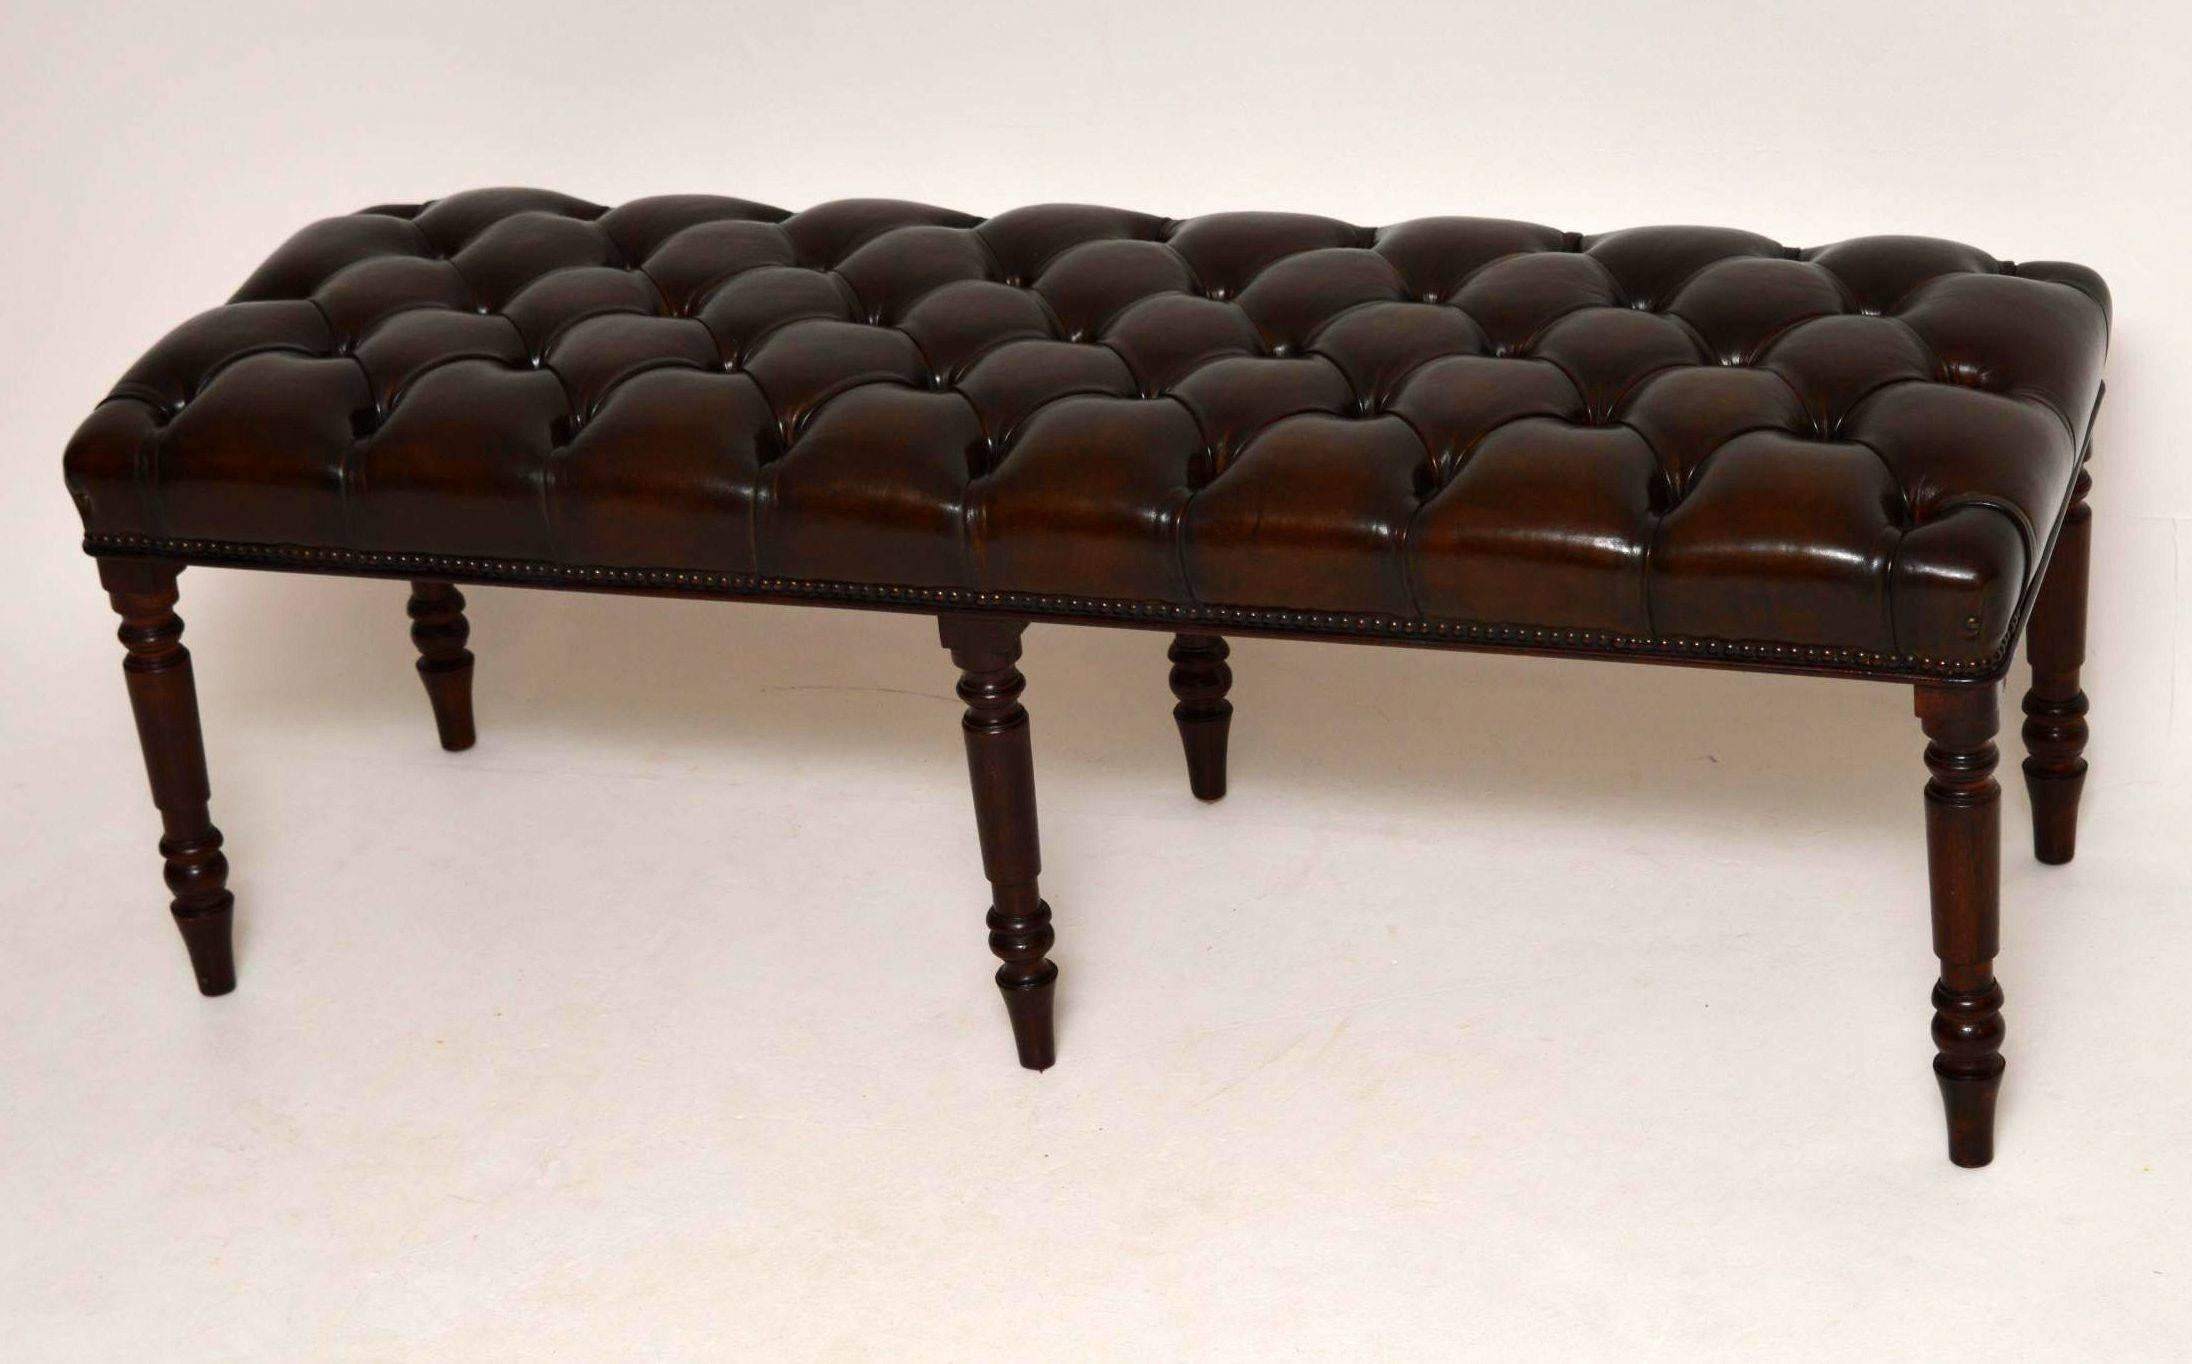 Contemporary Antique Deep Buttoned Leather Stool on Mahogany Legs